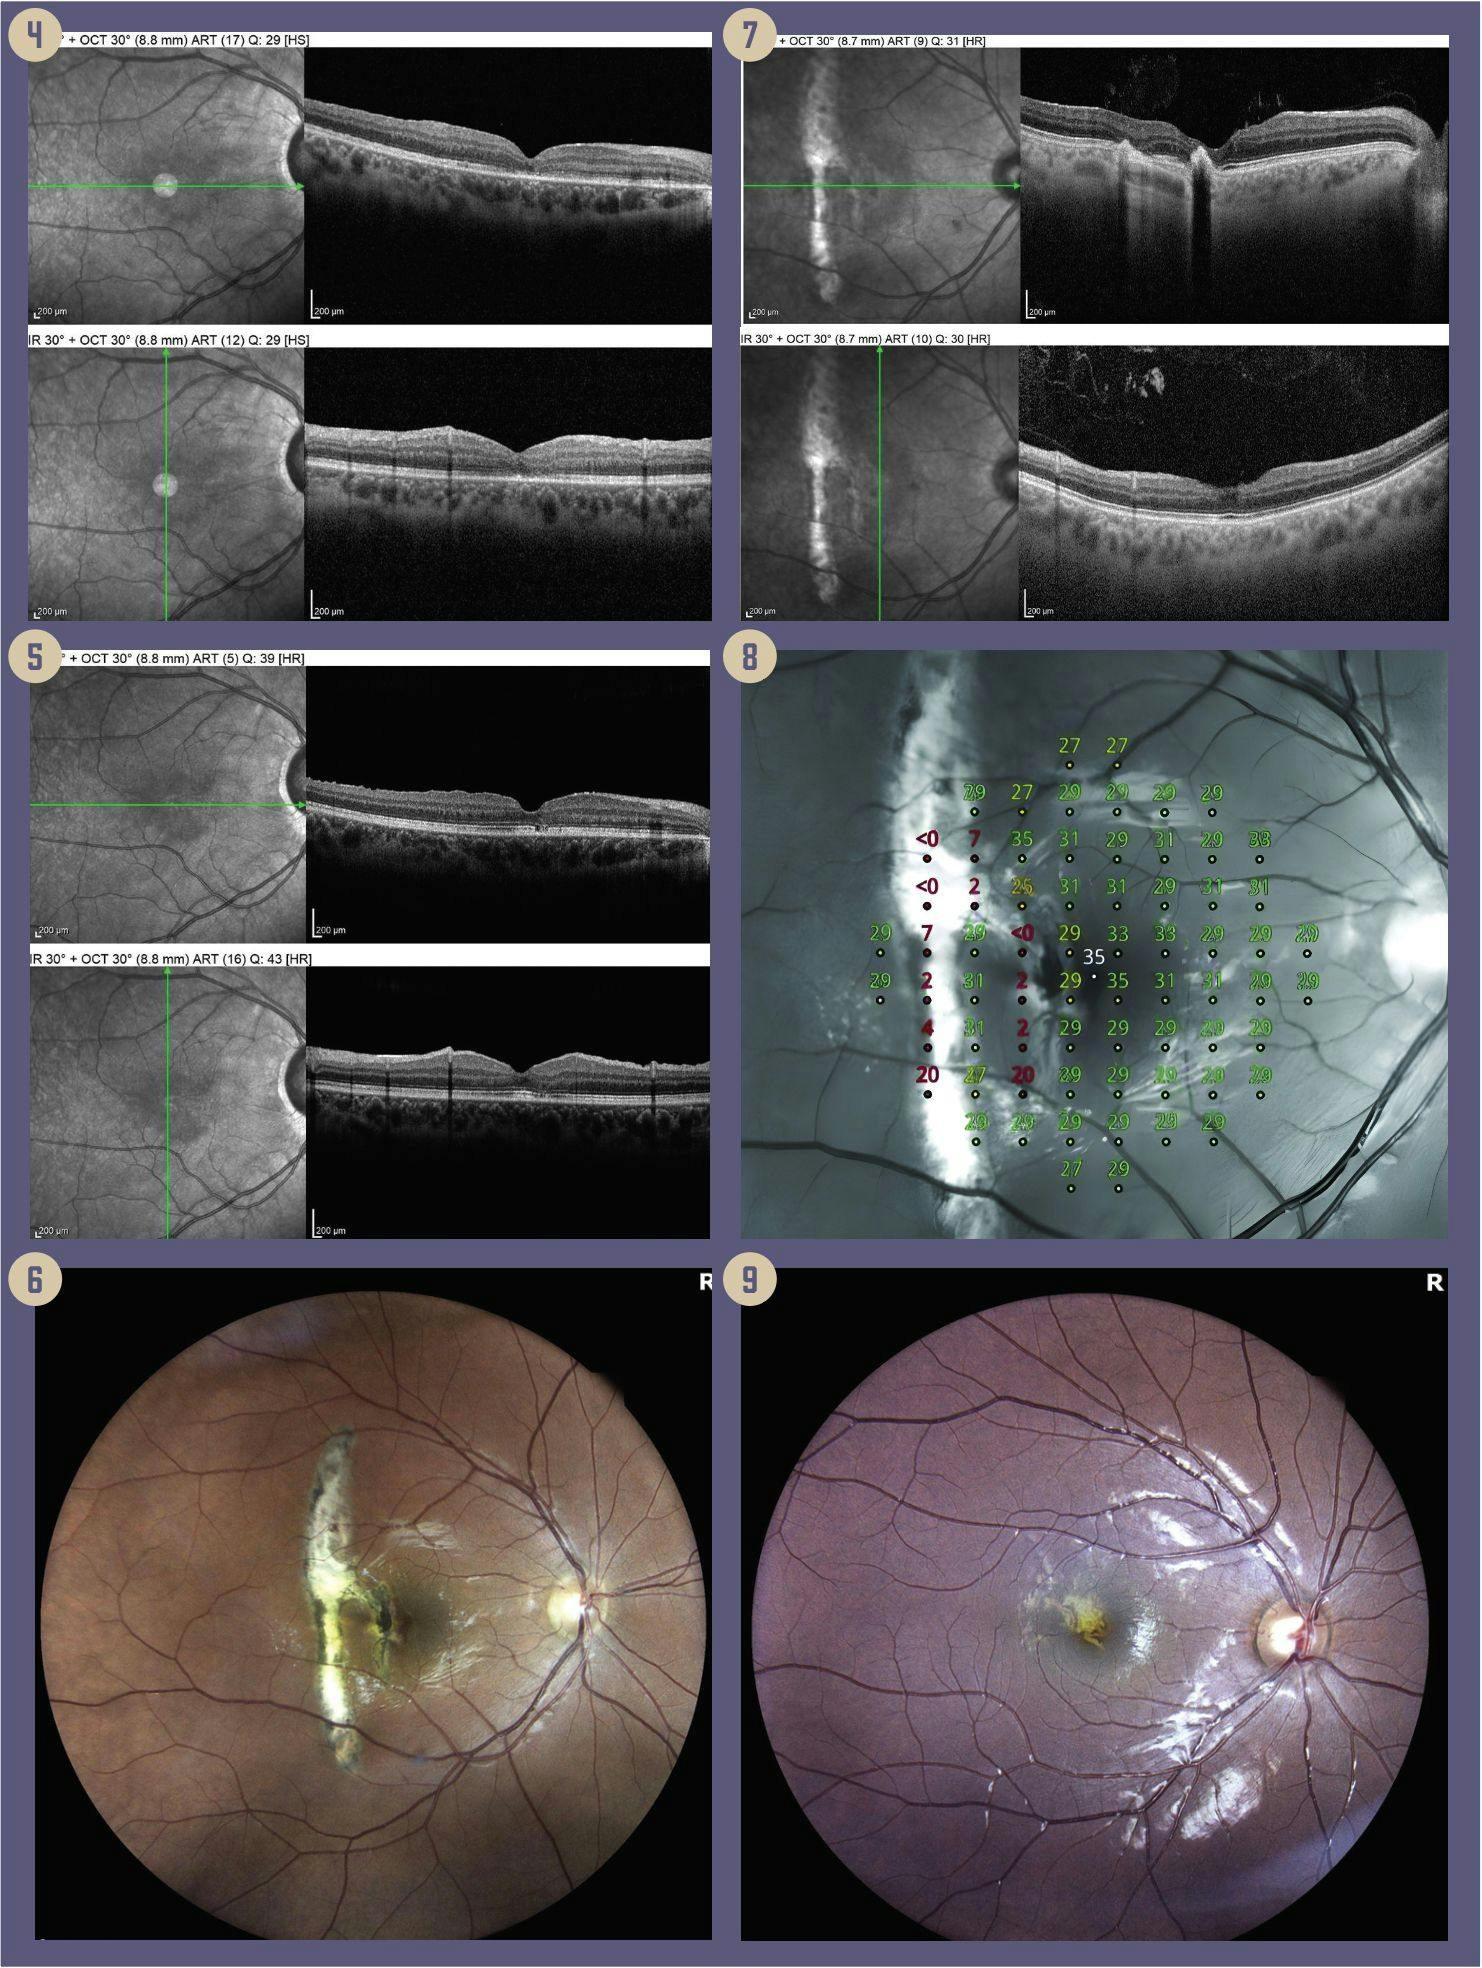 Figures: 4: OCT (post op 2 months) closure of macular hole with resolution of cystoid hydration (Vac 20/50). 5: OCT (post op 1 year) closure of macular hole with resolution of cystoid hydration and improvement in the photoreceptor layer (Vac 20/25). 6: Fundus photo with traumatic choroidal rupture. 7: OCT revealing 2 breaks in Bruch membrane with intact photoreceptors centrally without edema. 8: Microperimetry consistent with paracentral scotoma and preserved 20/20 central vision. 9: A fundus photo with laser